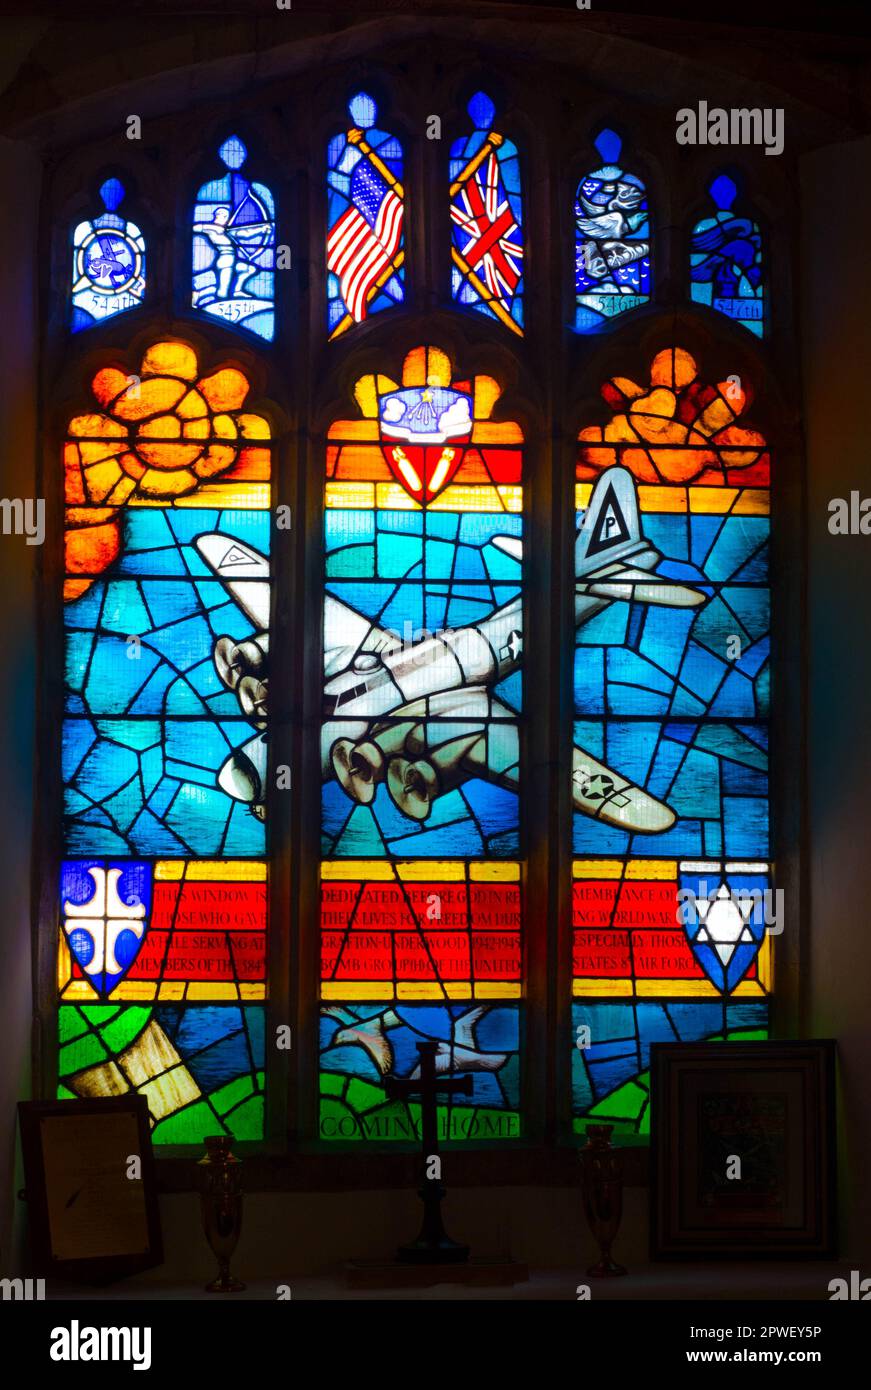 Stained glass window commemorating the USAAF 384th Bomb Group in Grafton Underwood, Kettering, UK Stock Photo